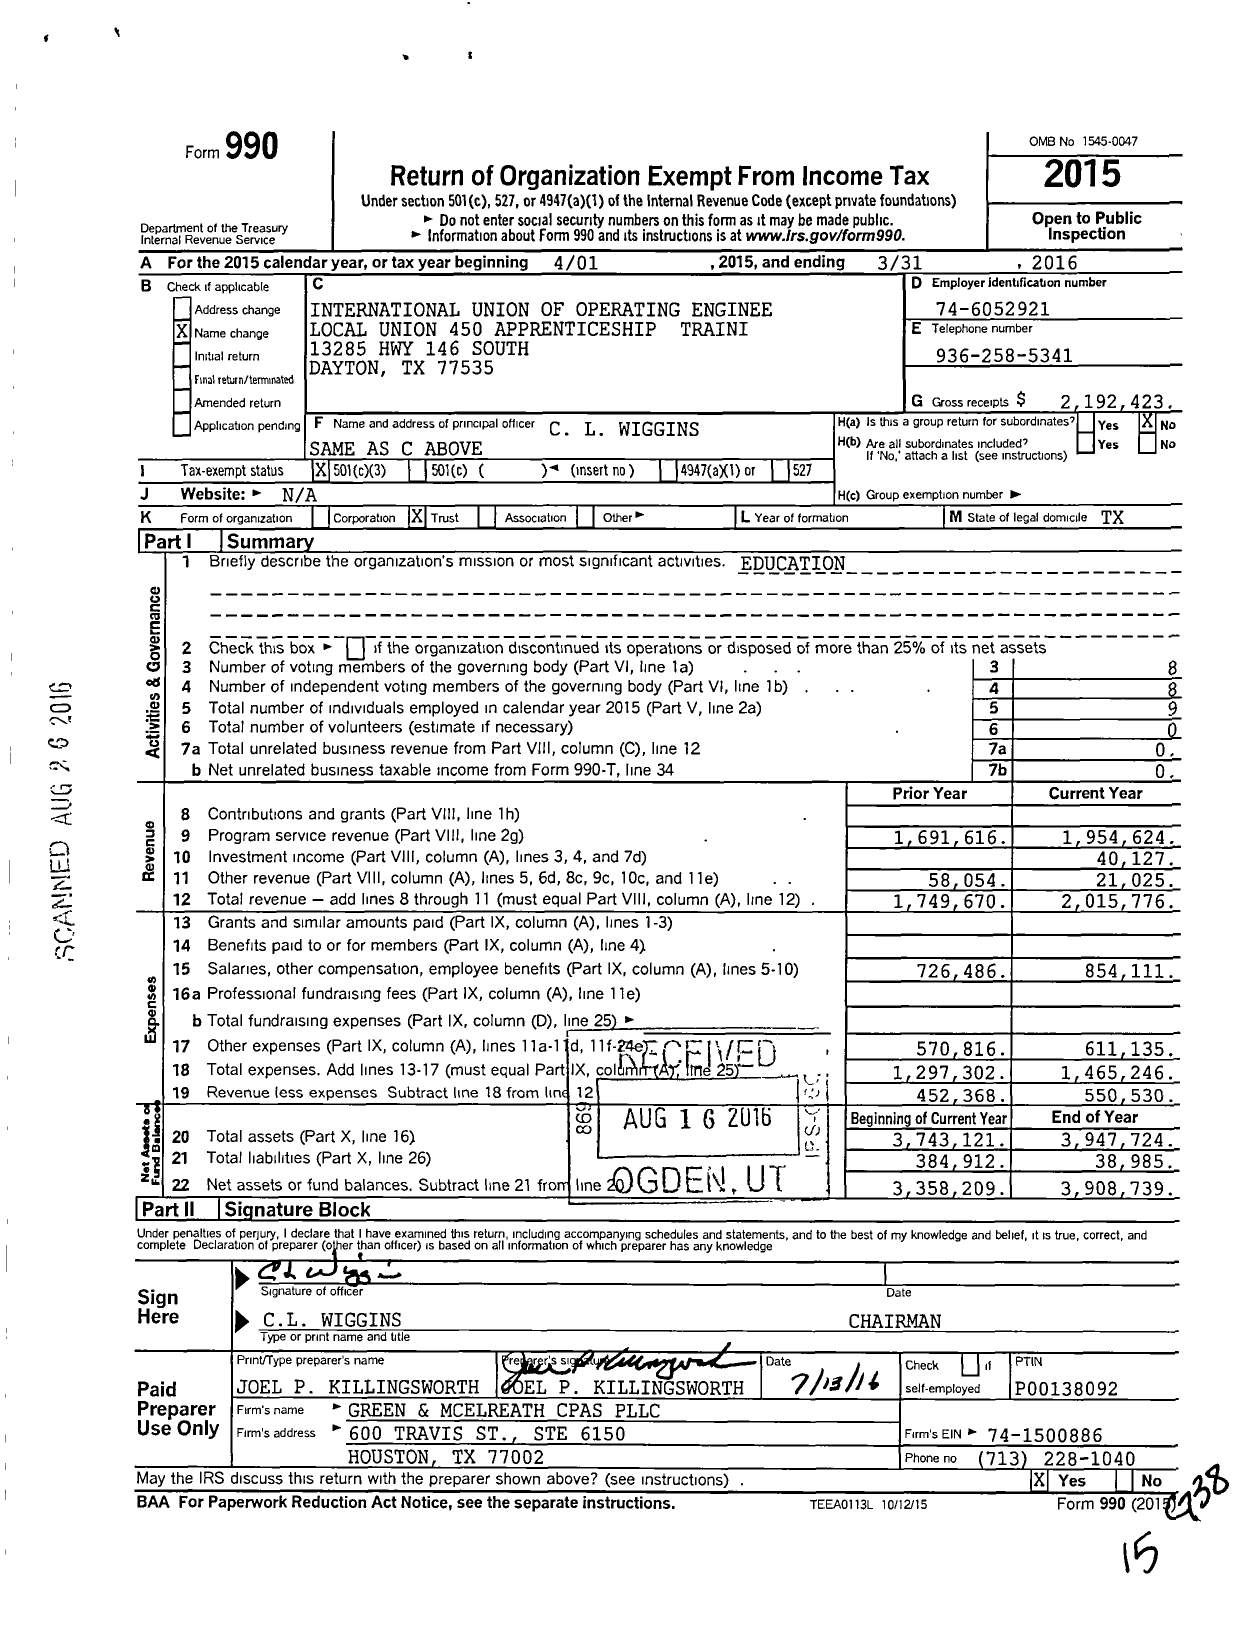 Image of first page of 2015 Form 990 for International Union of Operating Enginee Local Union 450 Appreticeship Training